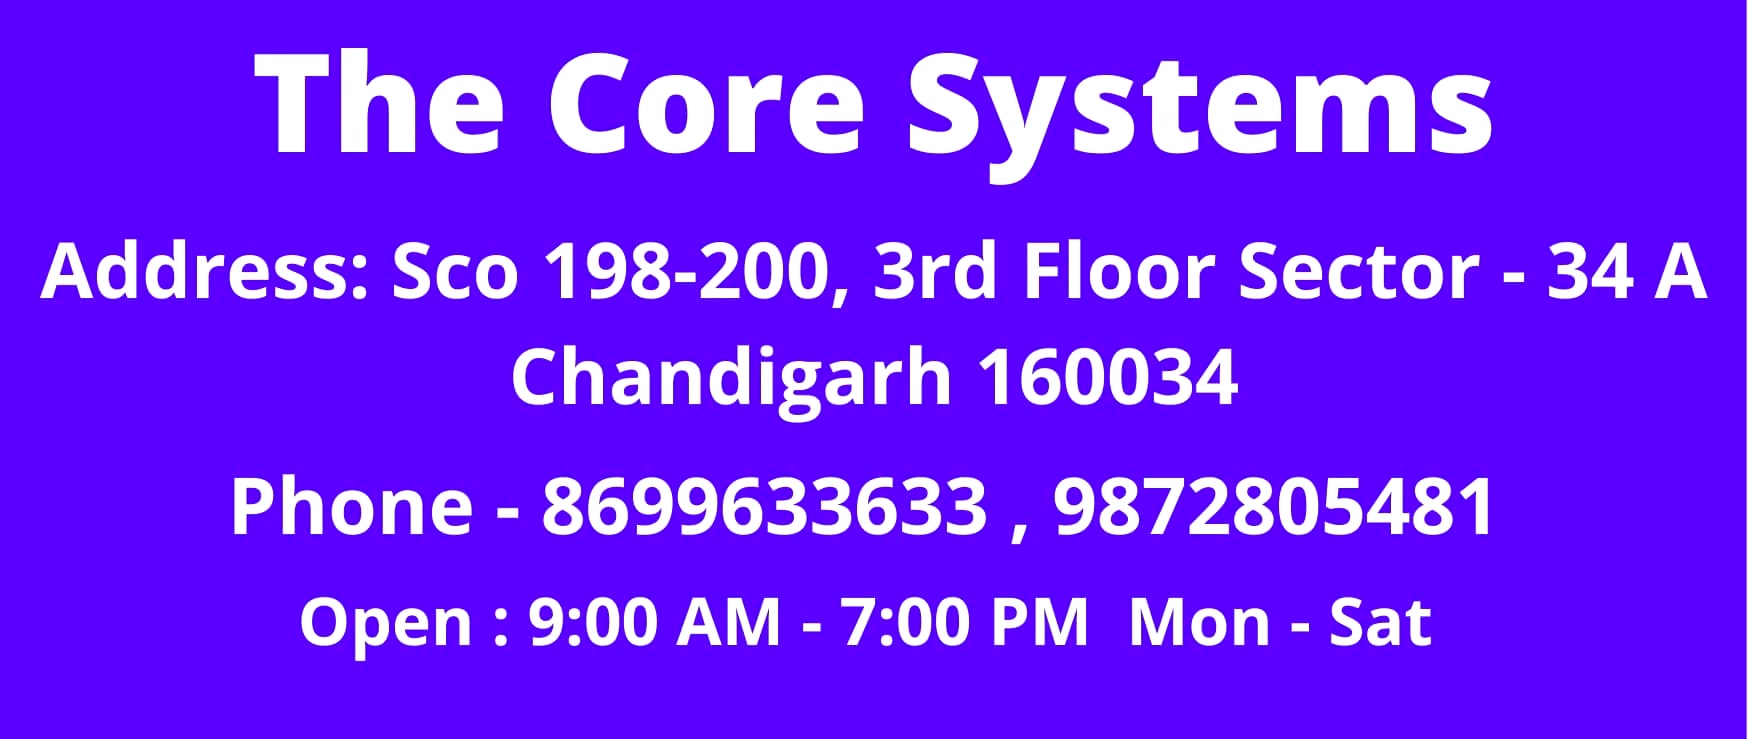 The Core Systems python training in chandigarh Python Training in Chandigarh | The Core Systems 2